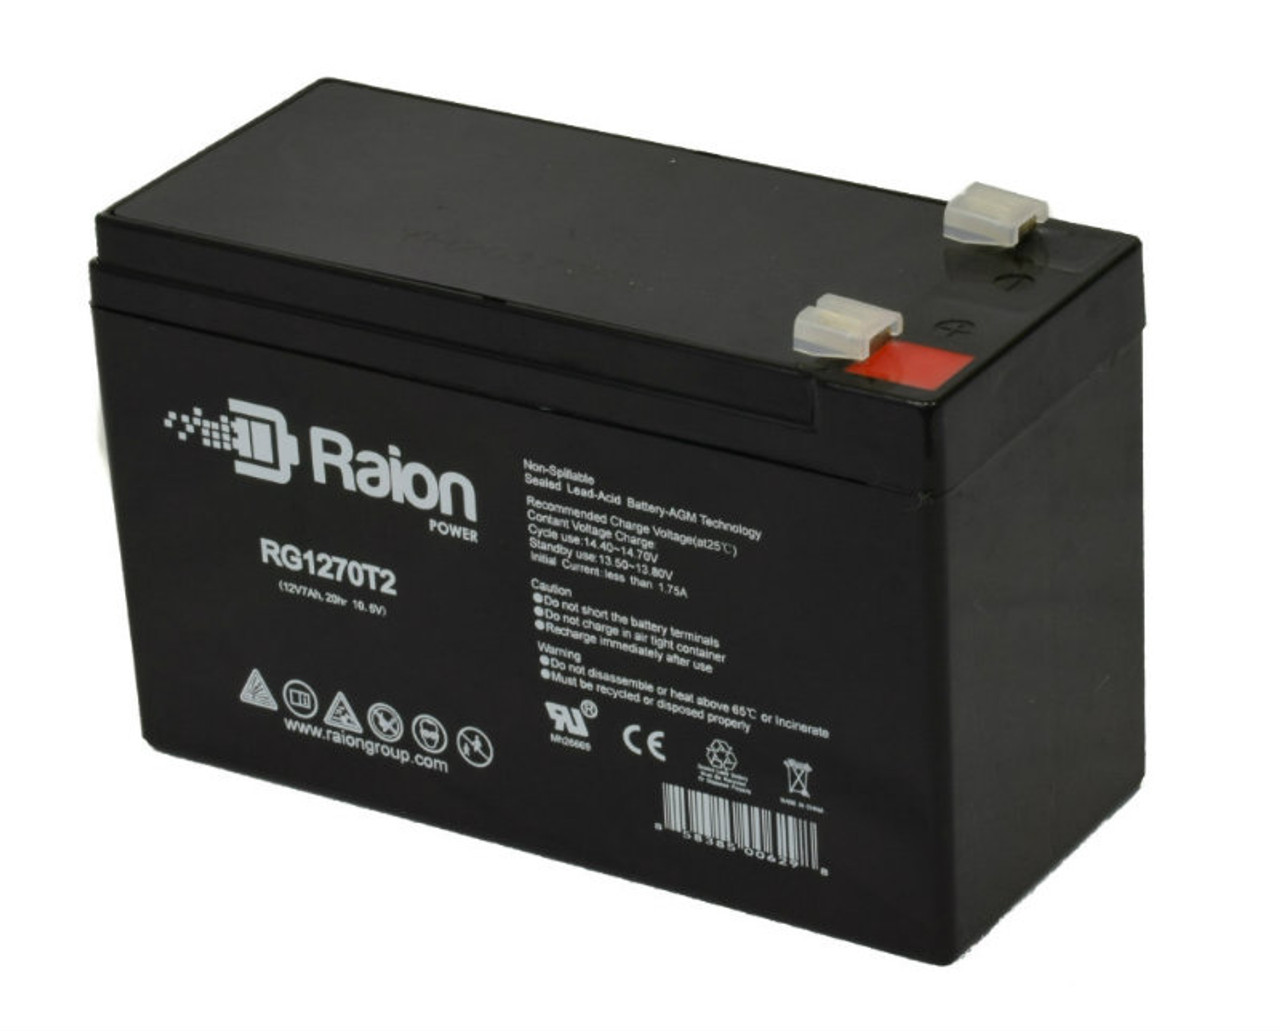 Raion Power RG1270T2 12V 7Ah Rechargeable Battery for Stannah Saxon Stairlift